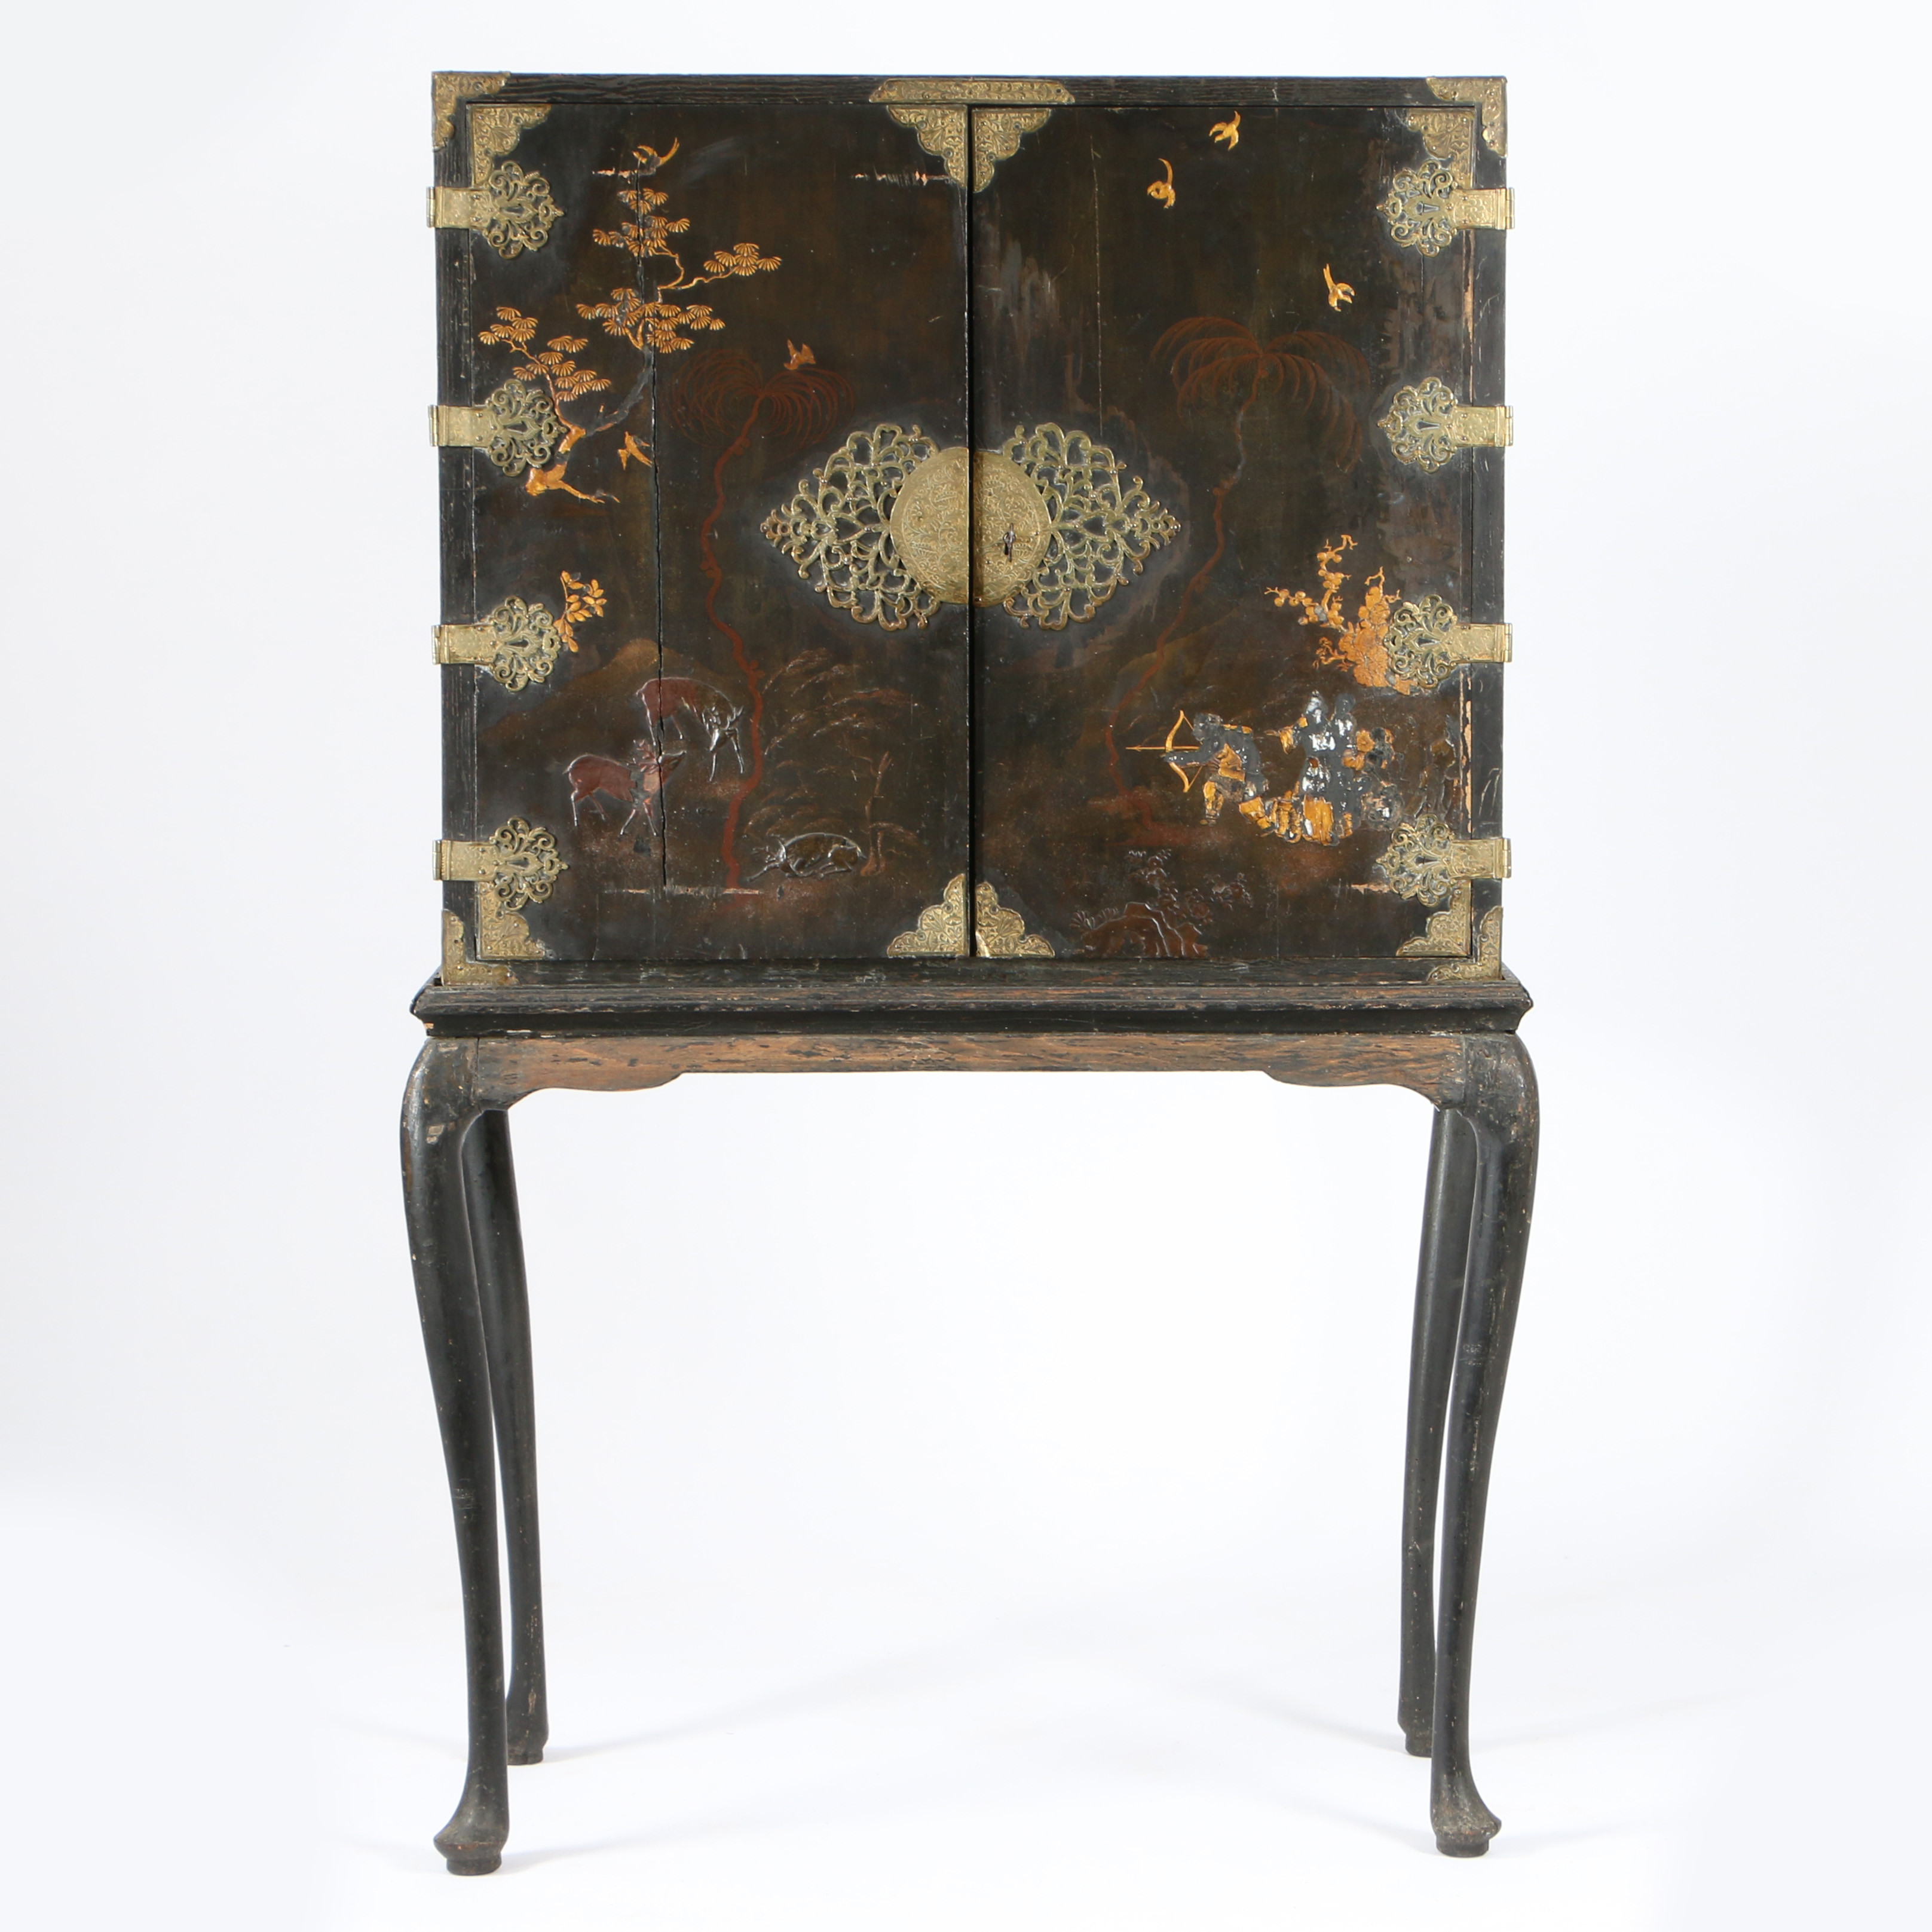 AN EARLY 18TH CENTURY JAPANESE EXPORT BLACK LACQUERED CABINET-ON-STAND, CIRCA 1720.